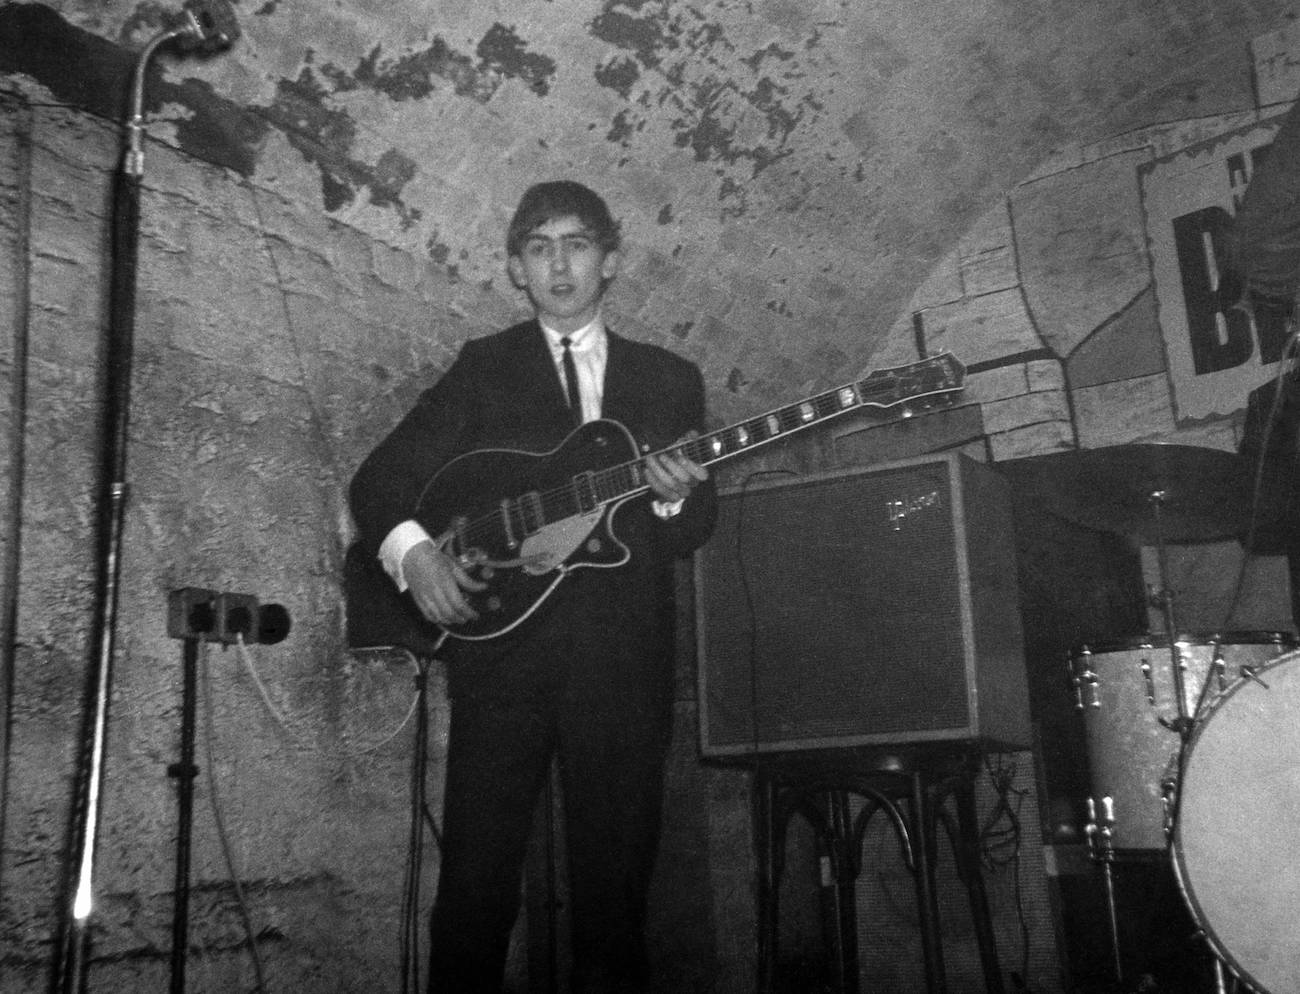 George Harrison performing at the Cavern Club in 1962.